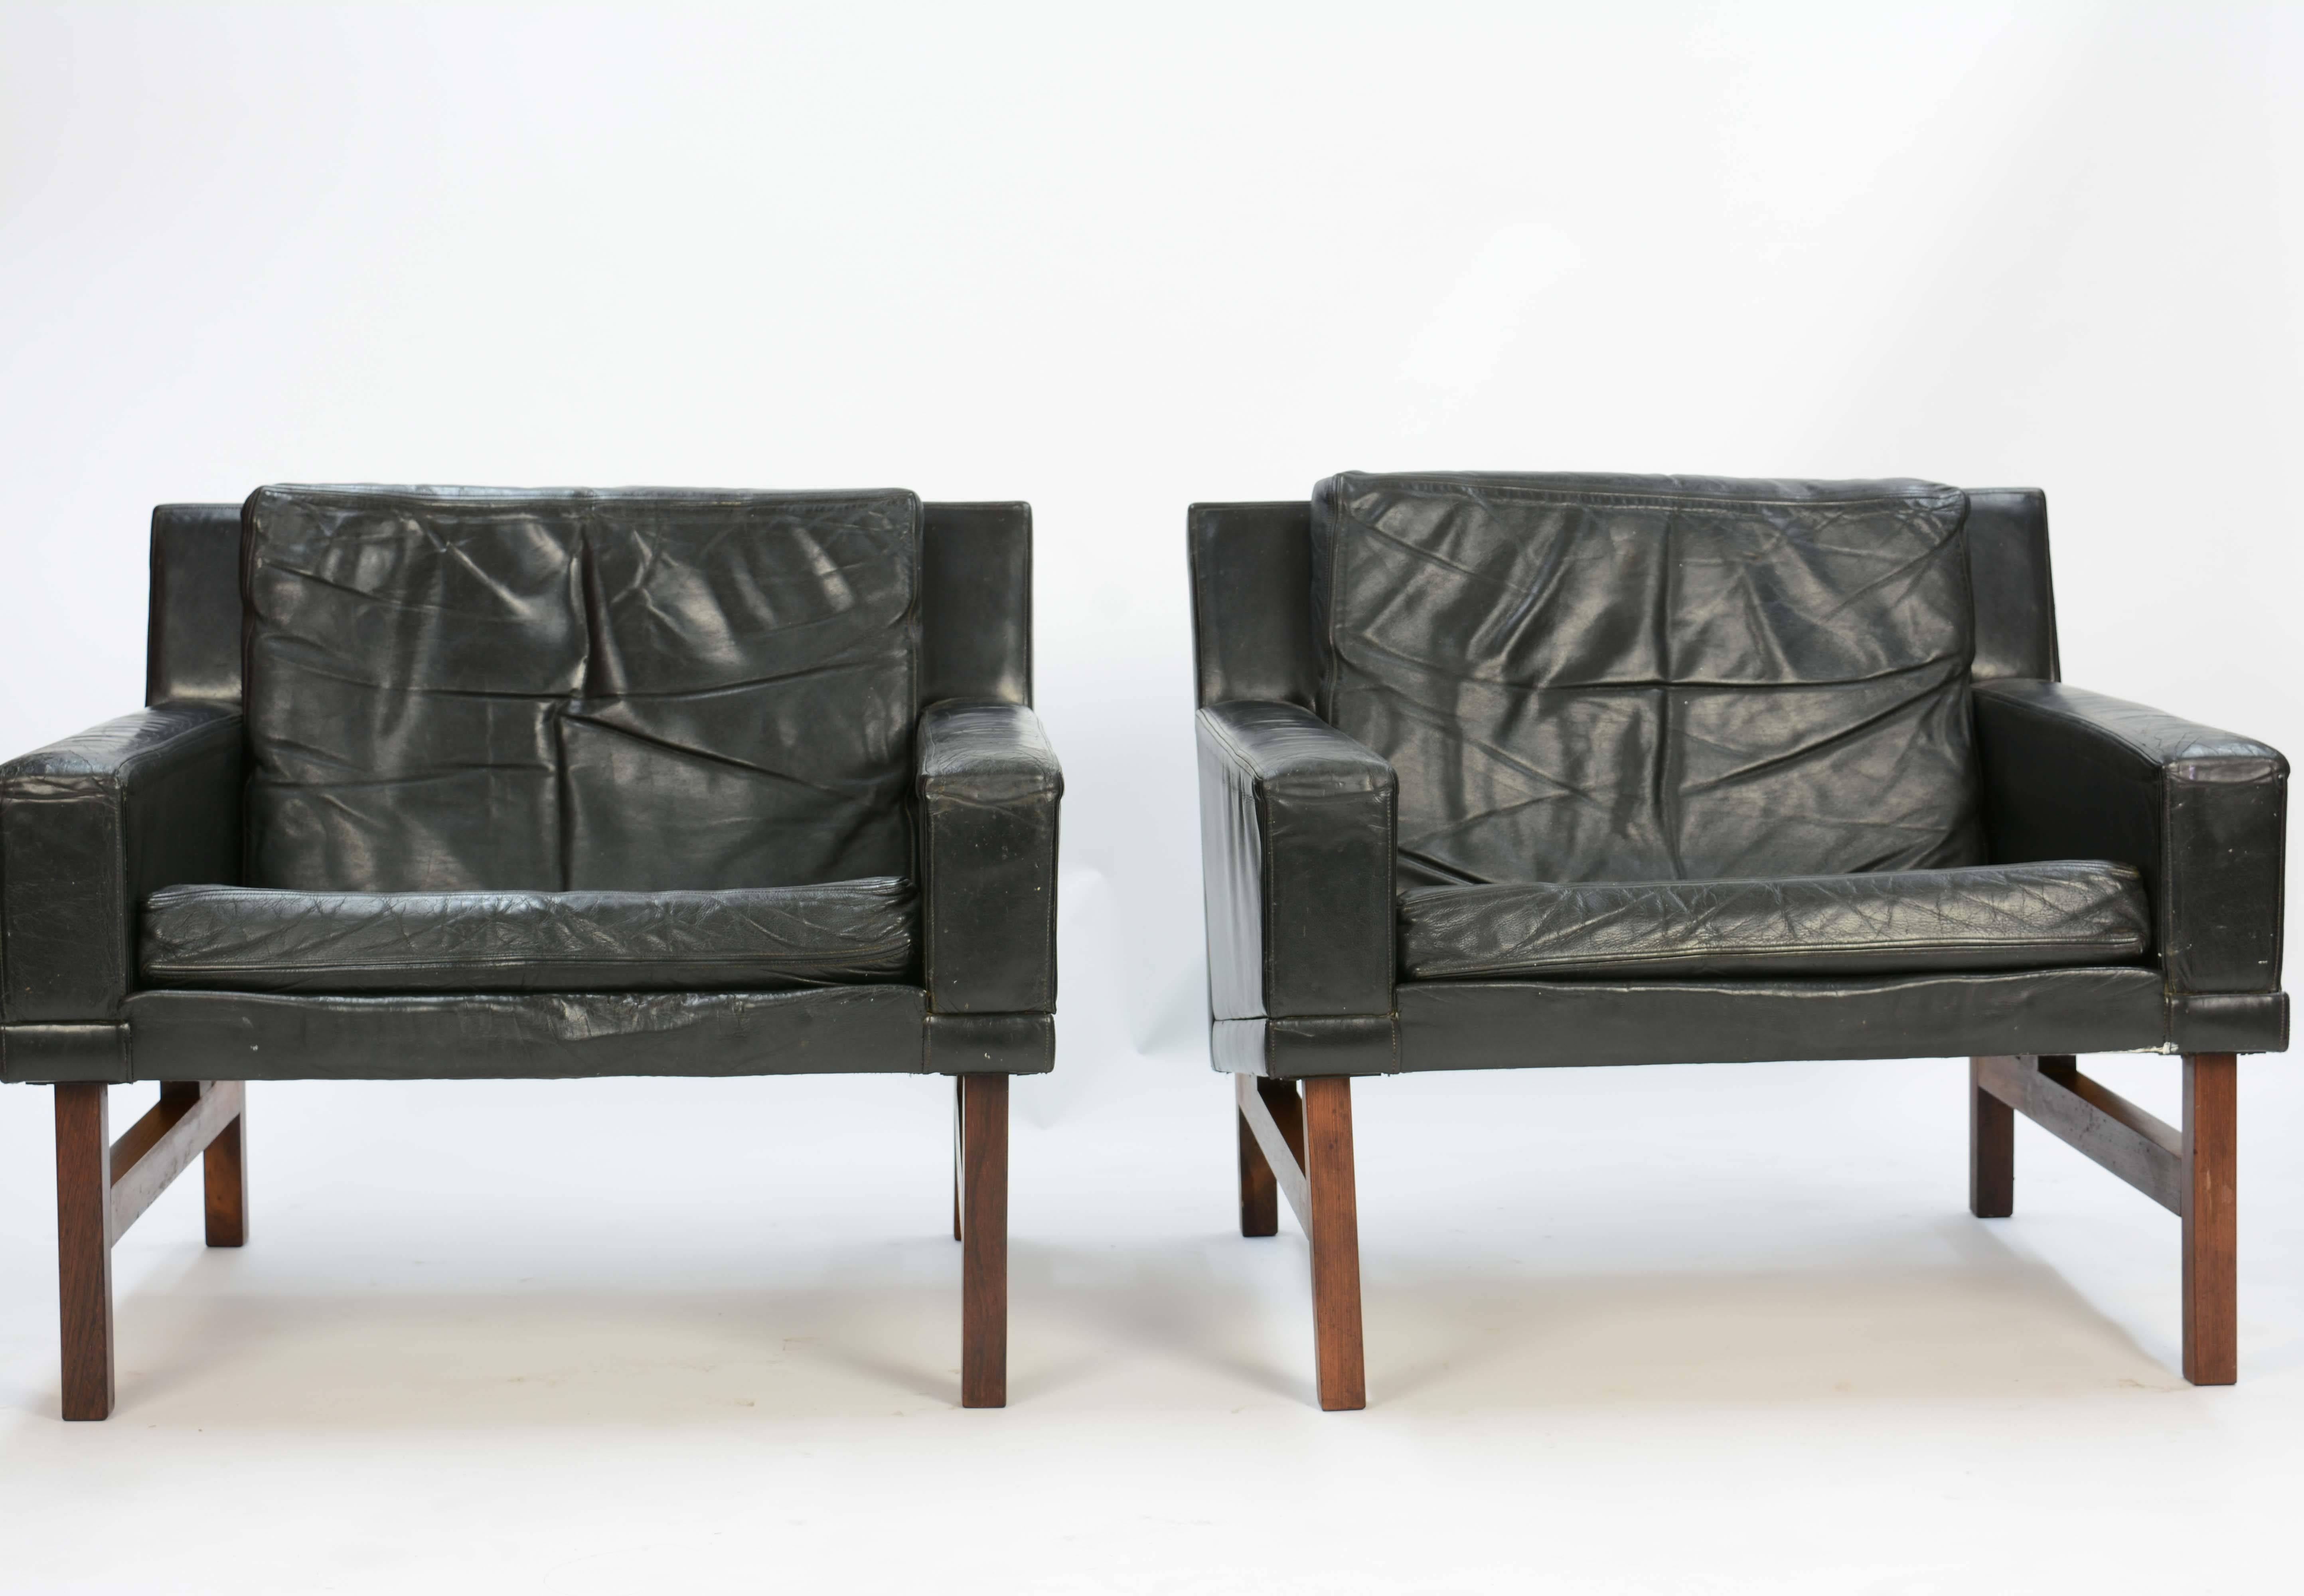 Rolschau Mobler's Club Chairs in distressed leather and floating rosewood frames by Sven Ellekaer.